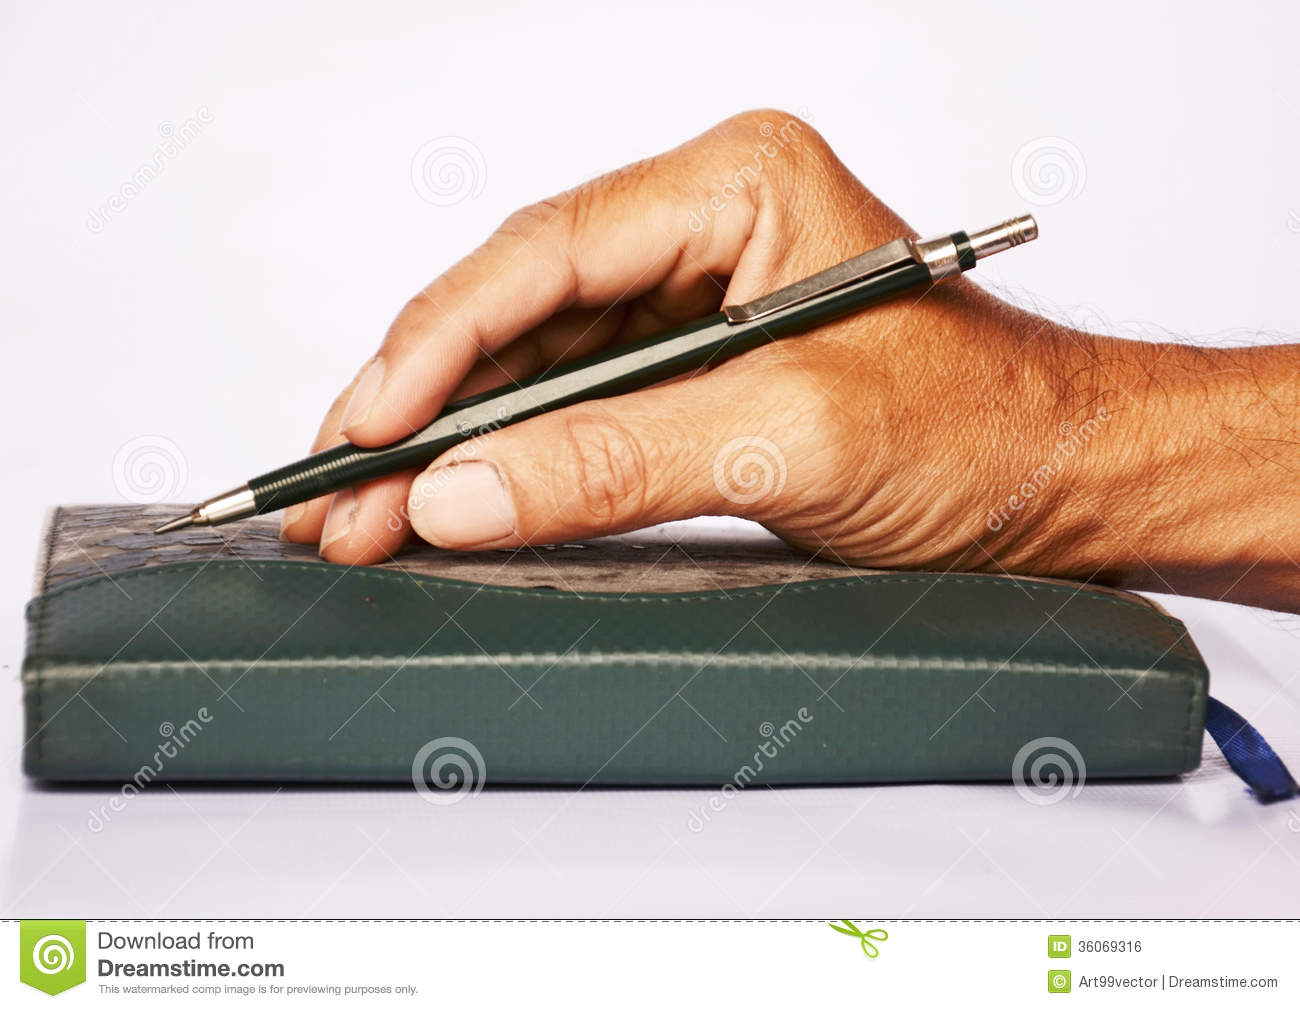 Diary Pencil Grip Action Handle A Pencil The Background Is White